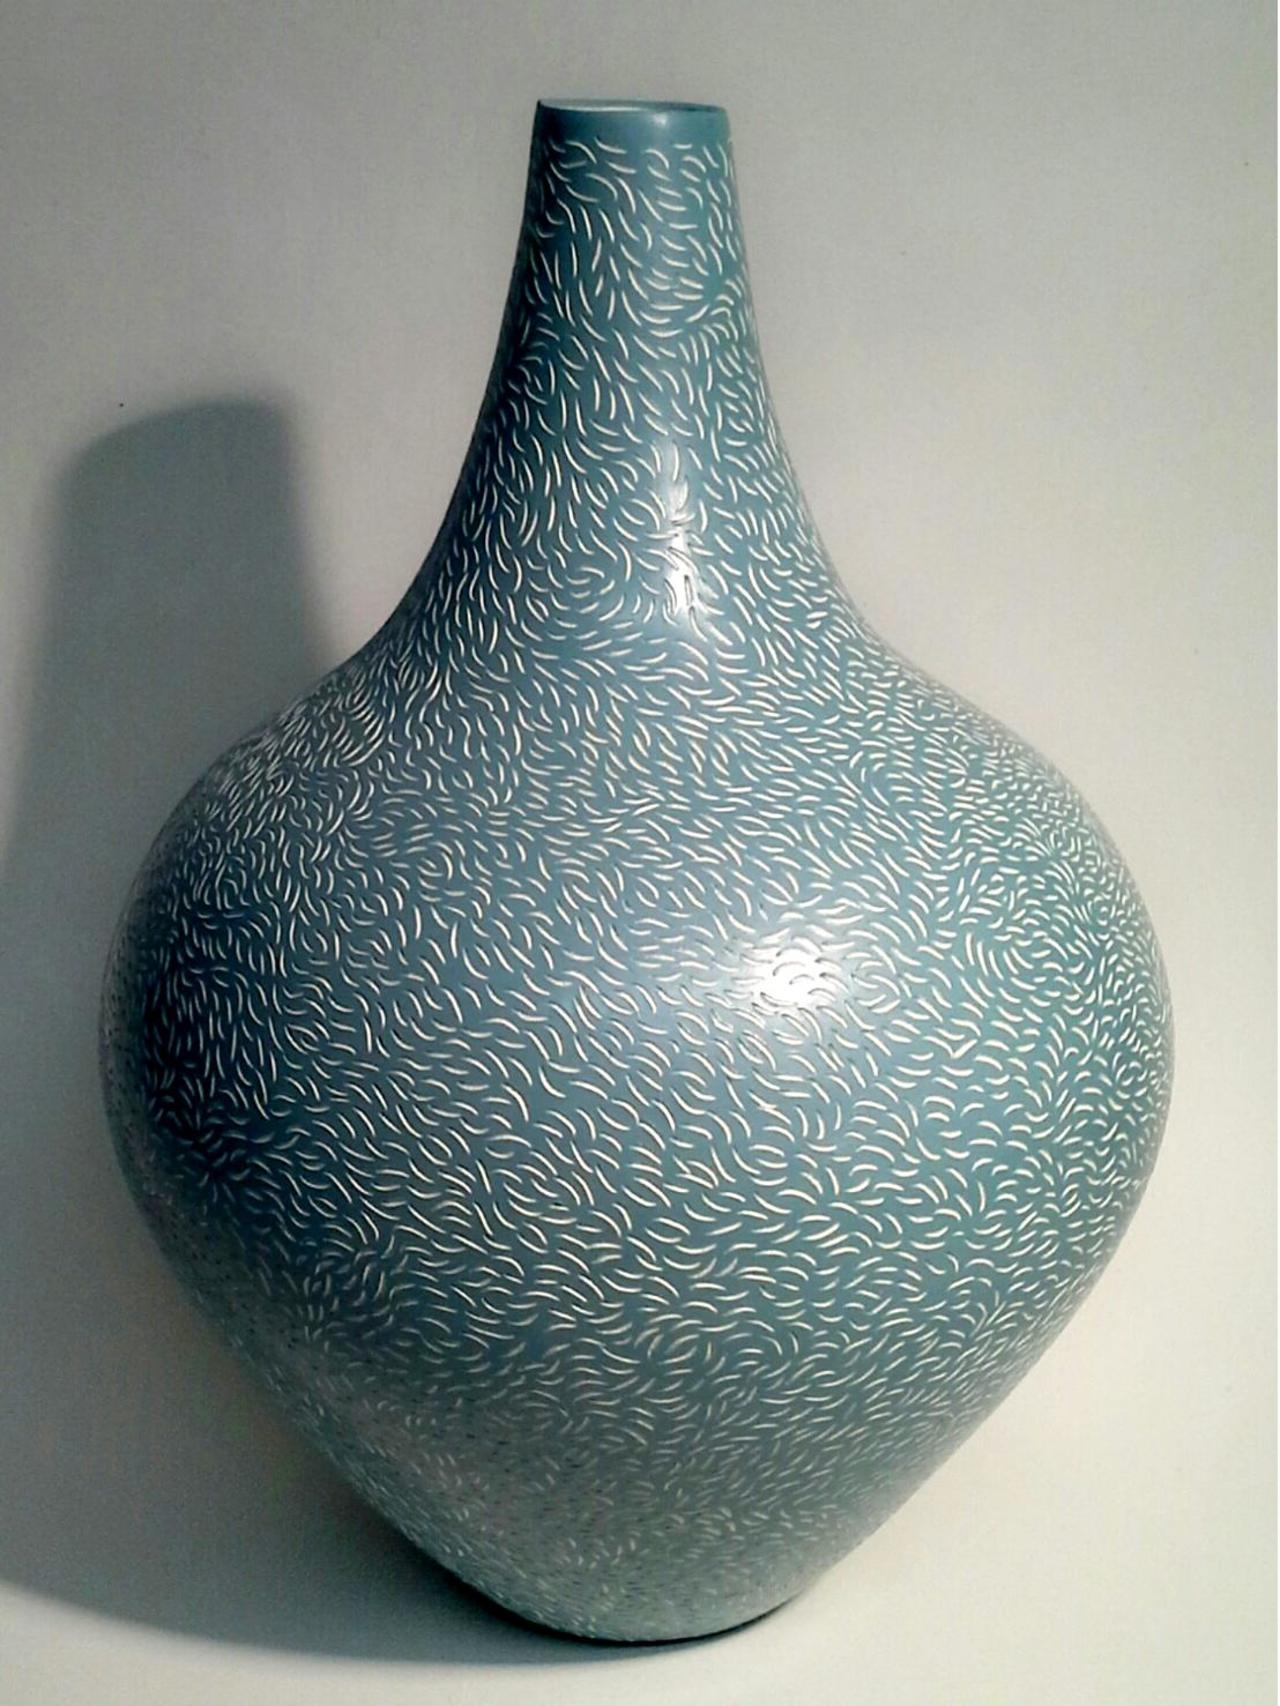 Annie Hellyer's beautiful #ceramics are our #gallery pick of the day! In our Spring show now! http://ow.ly/LtFND http://t.co/Ez5F4QviT1